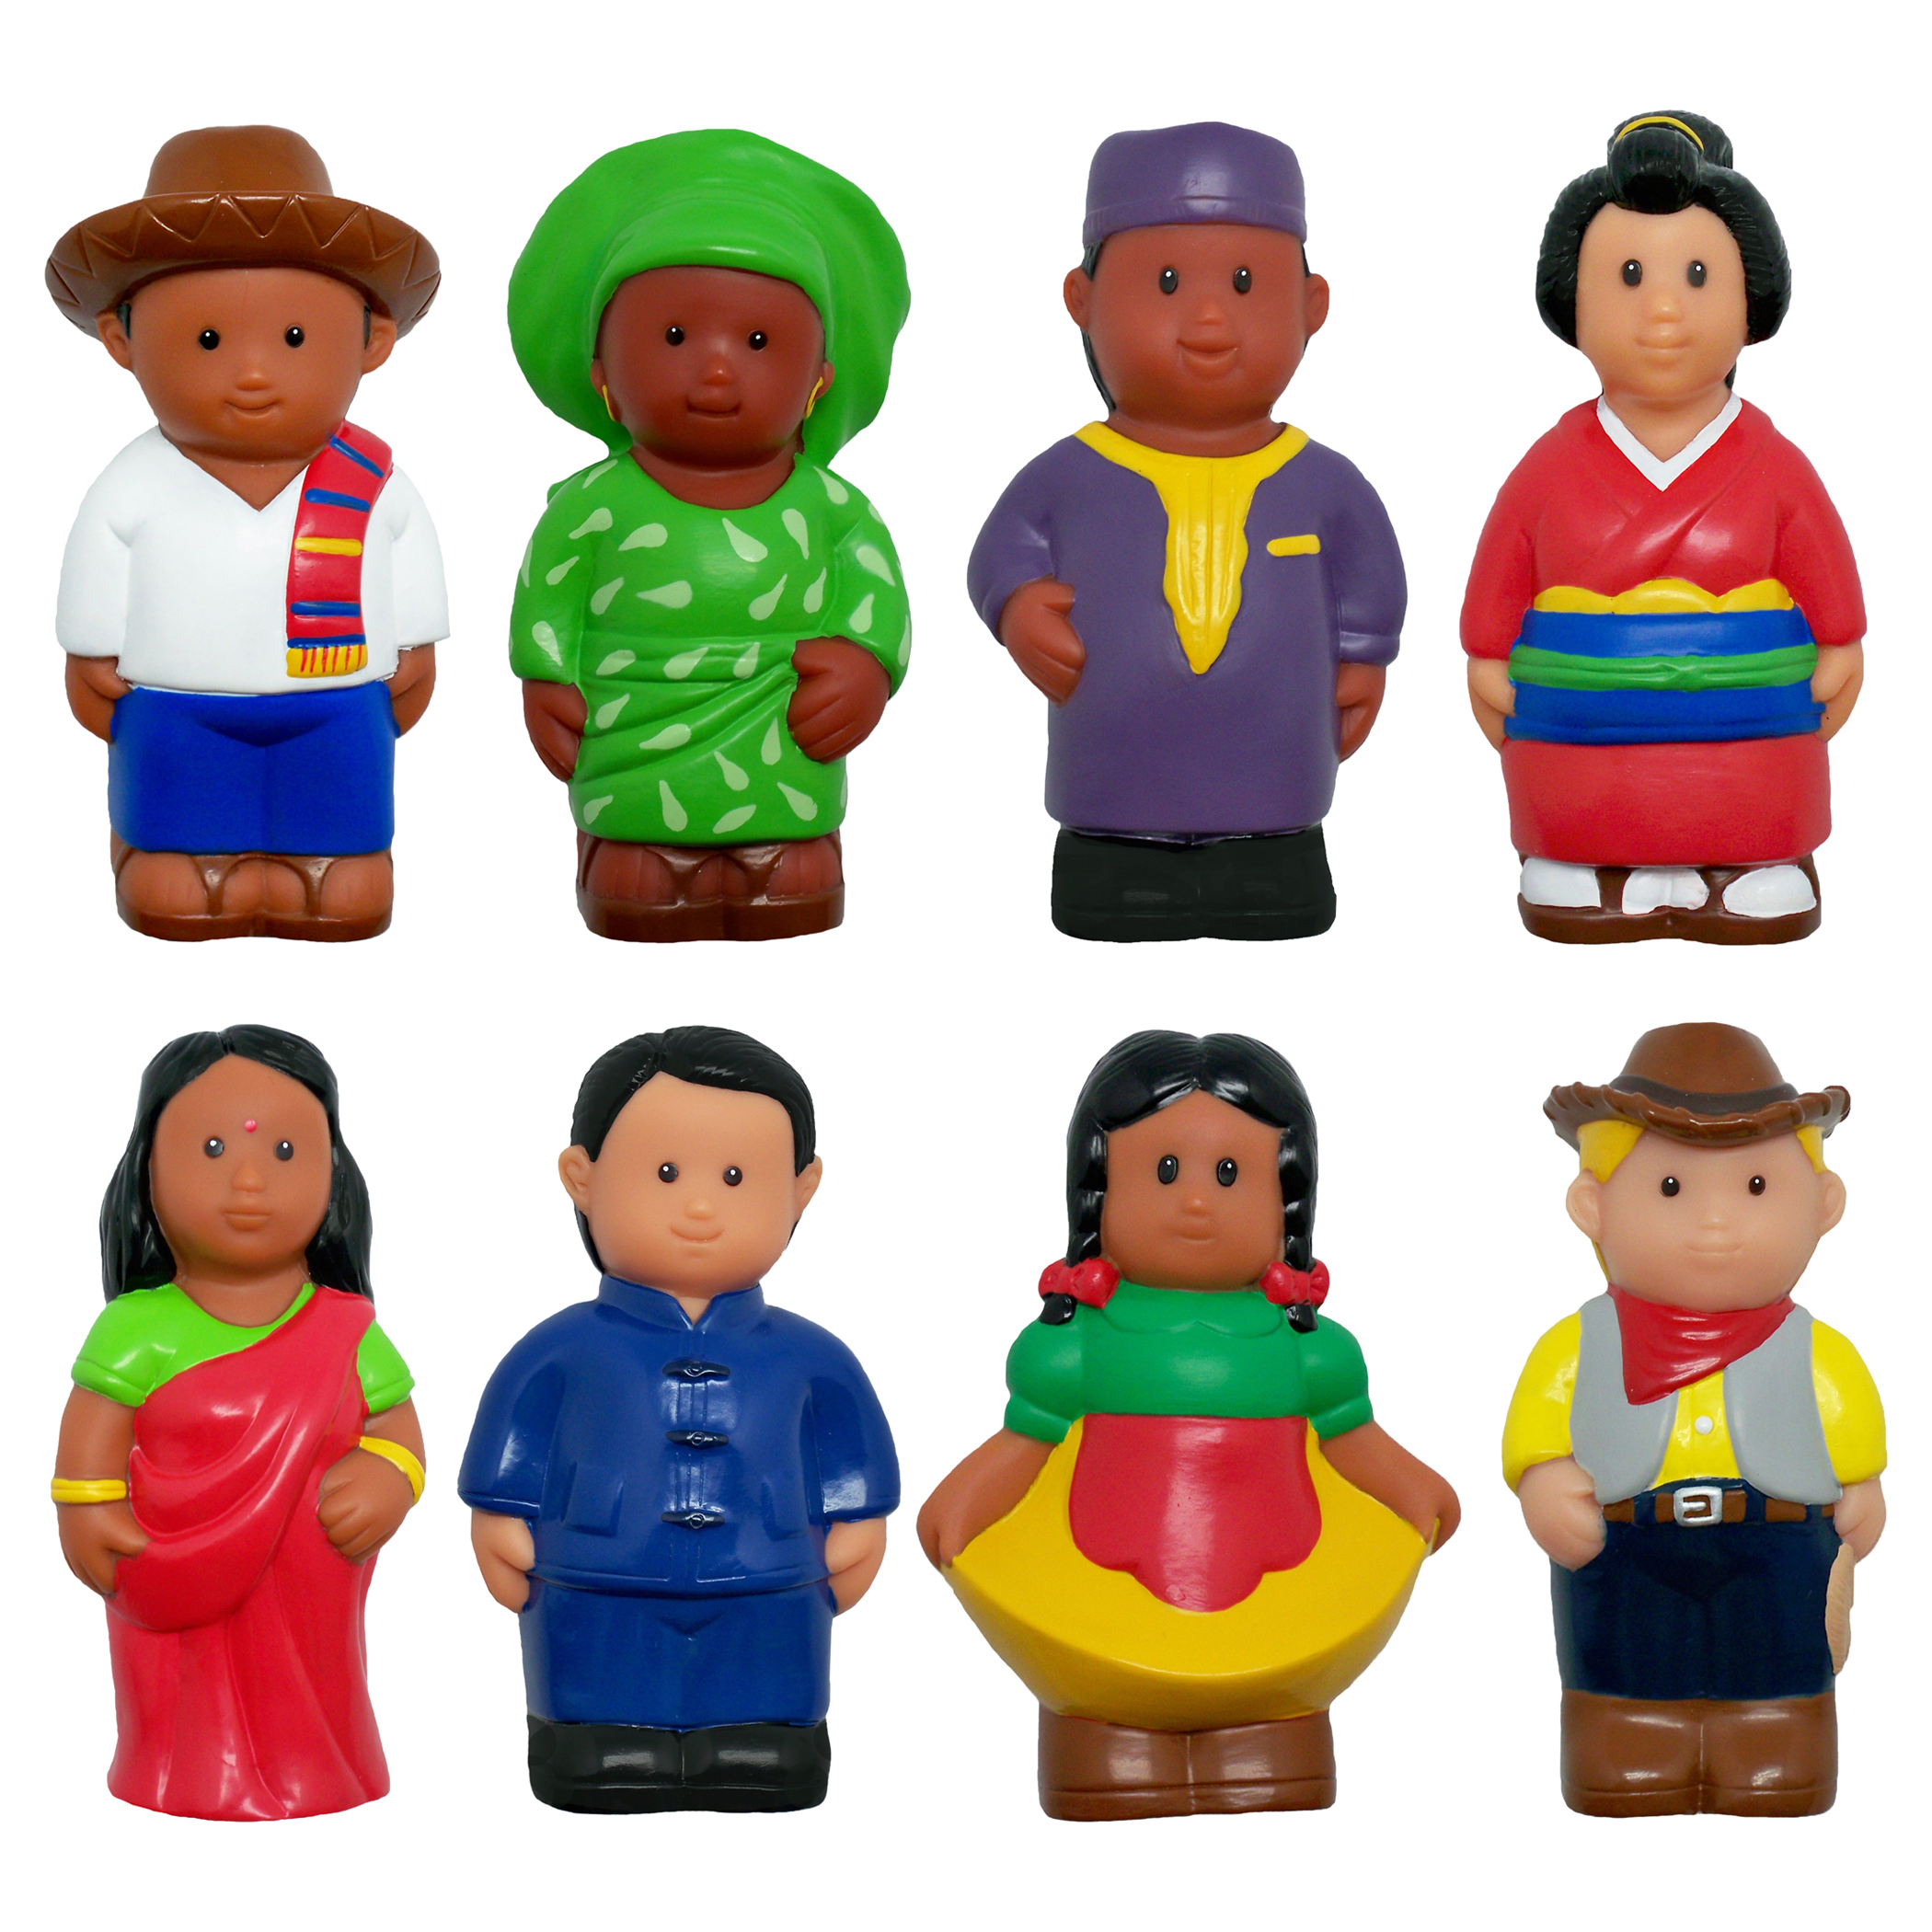 Get Ready Kids Multicultural Around the World Figures, Set of 8